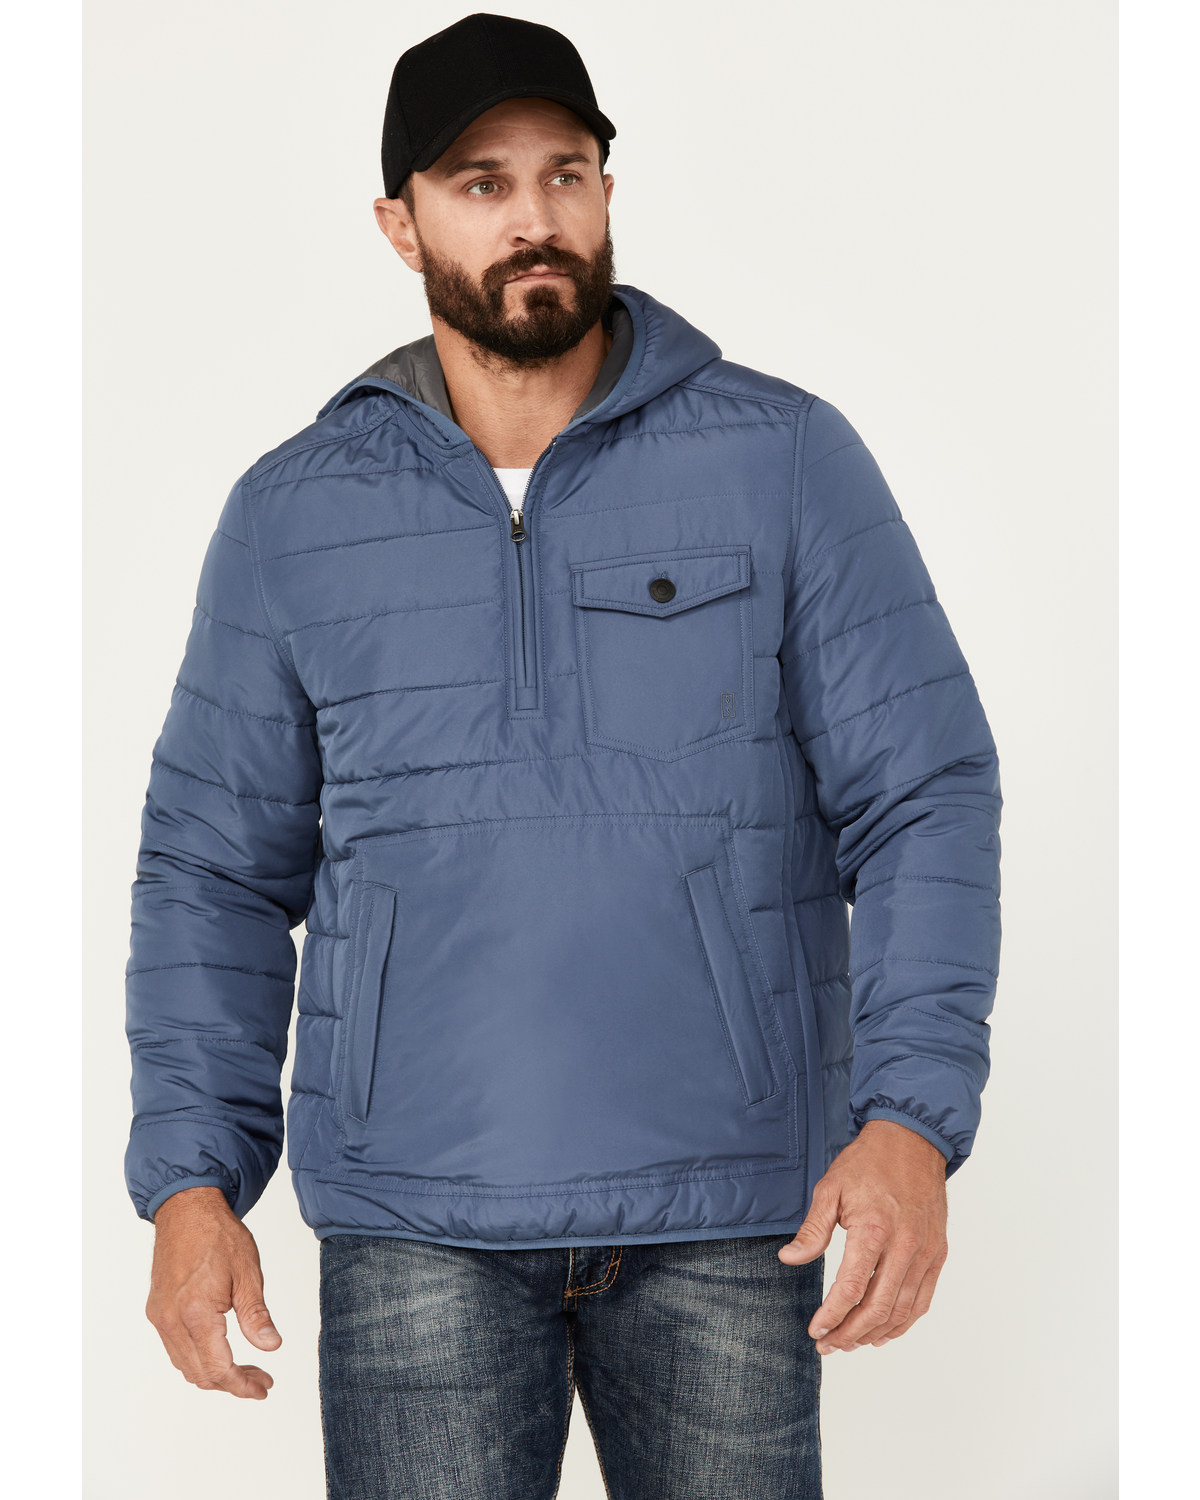 Brothers and Sons Men's Calhoun Anorak Insulated Hooded Jacket